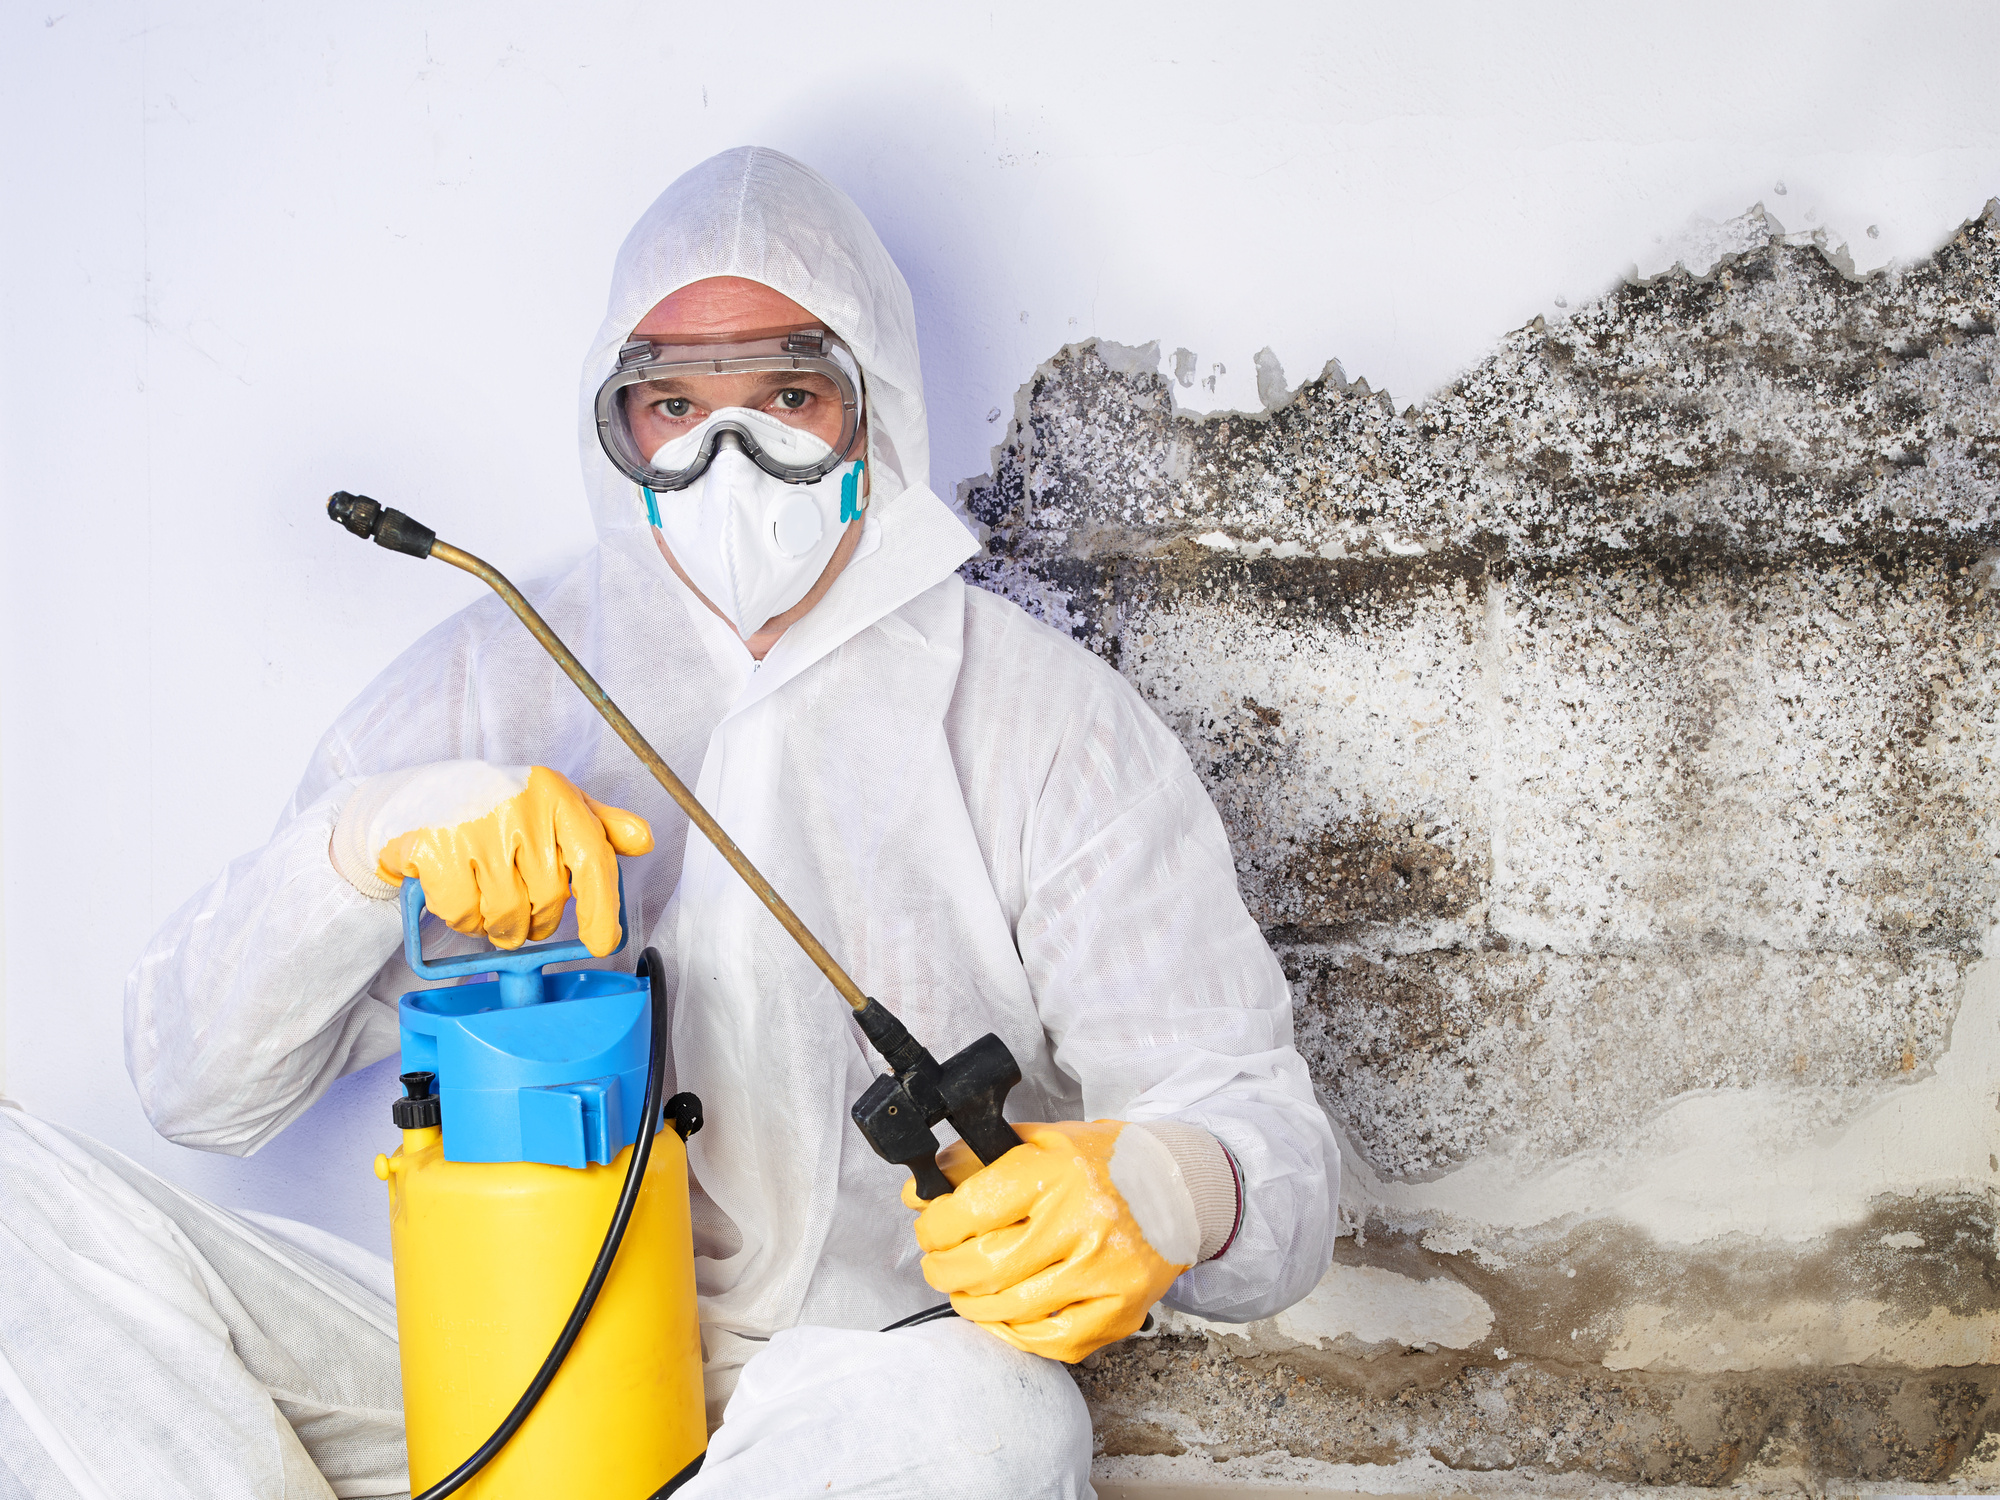 mold removal expert with protective gear and spraying machine in his hand. mold can also seen in background on the wall.